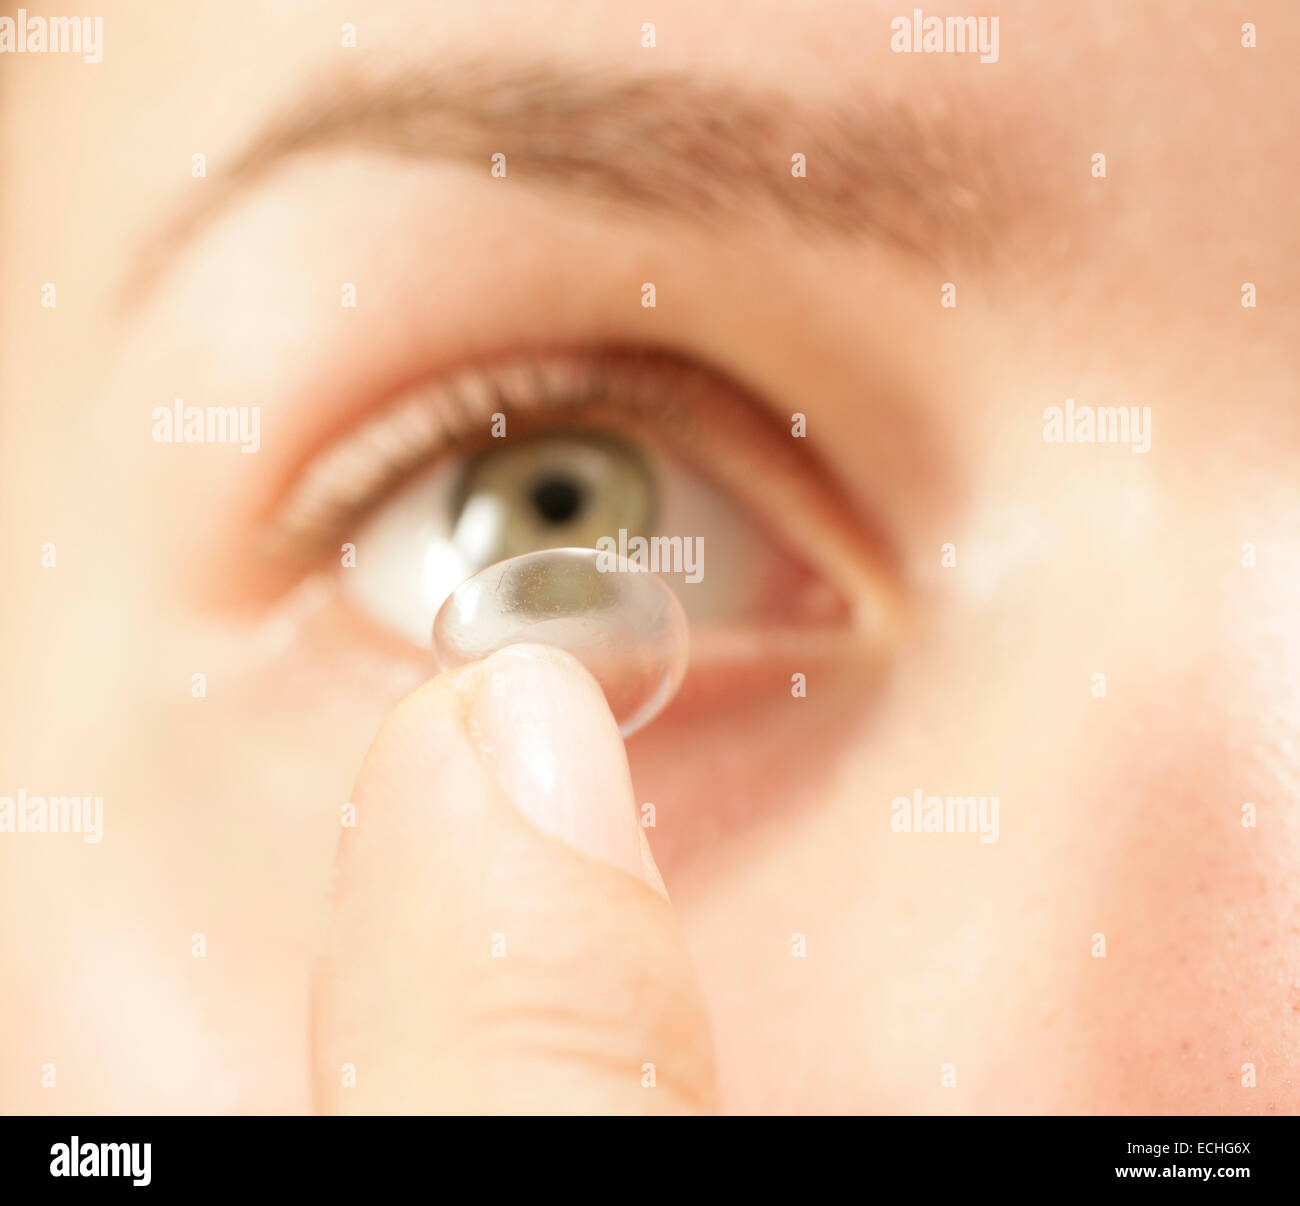 A close up straight on shot of a female putting in a contact lens into her eye Stock Photo